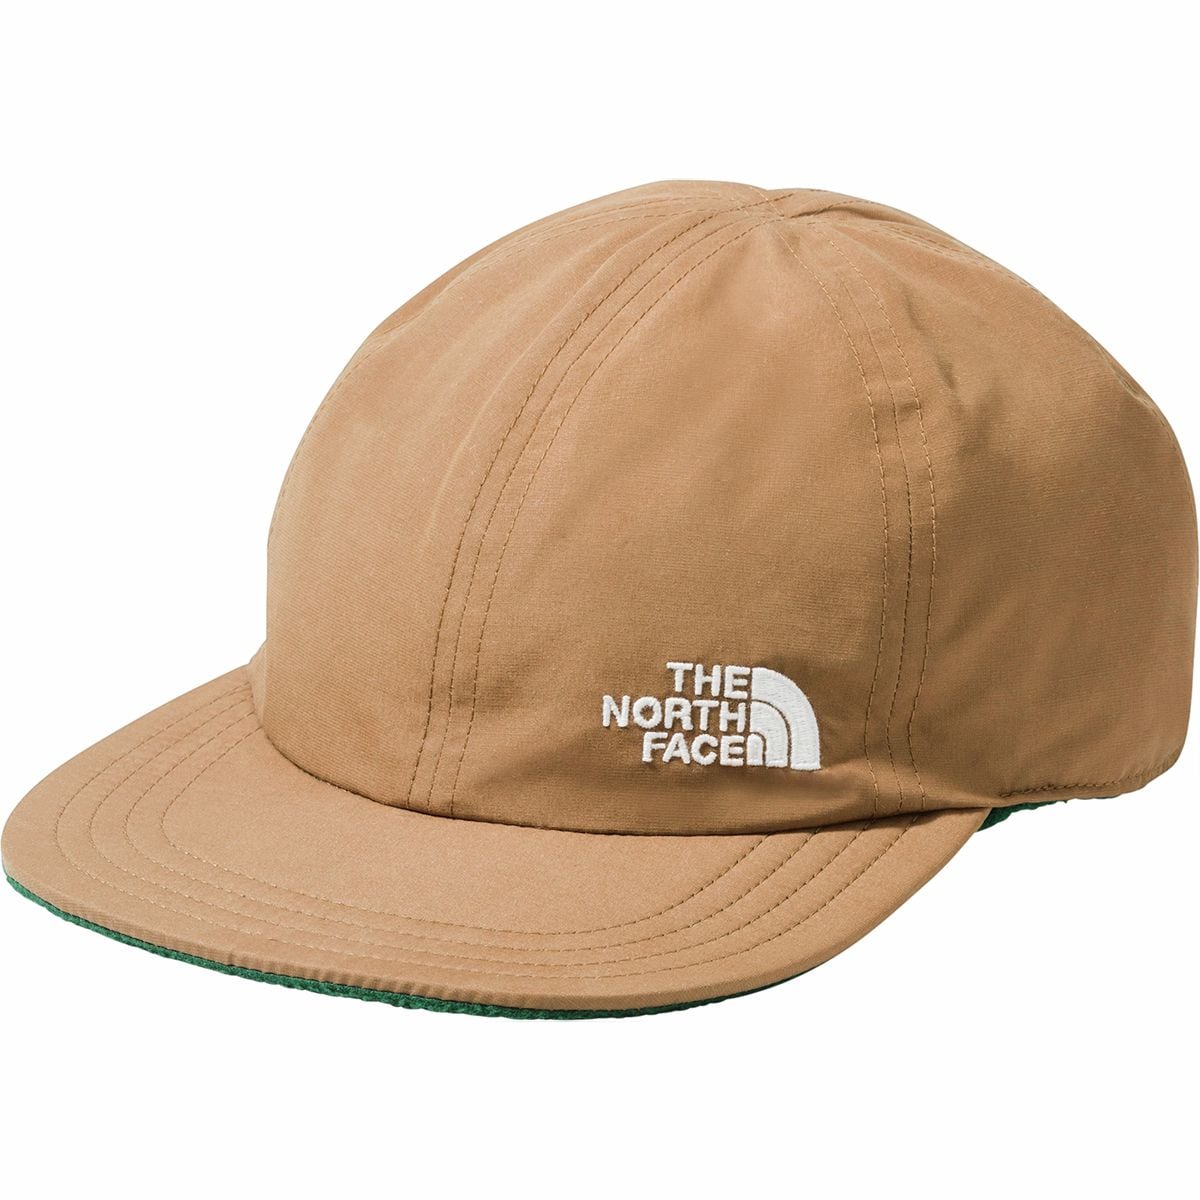 The North Face Reversible Fleece Norm Hat - Accessories